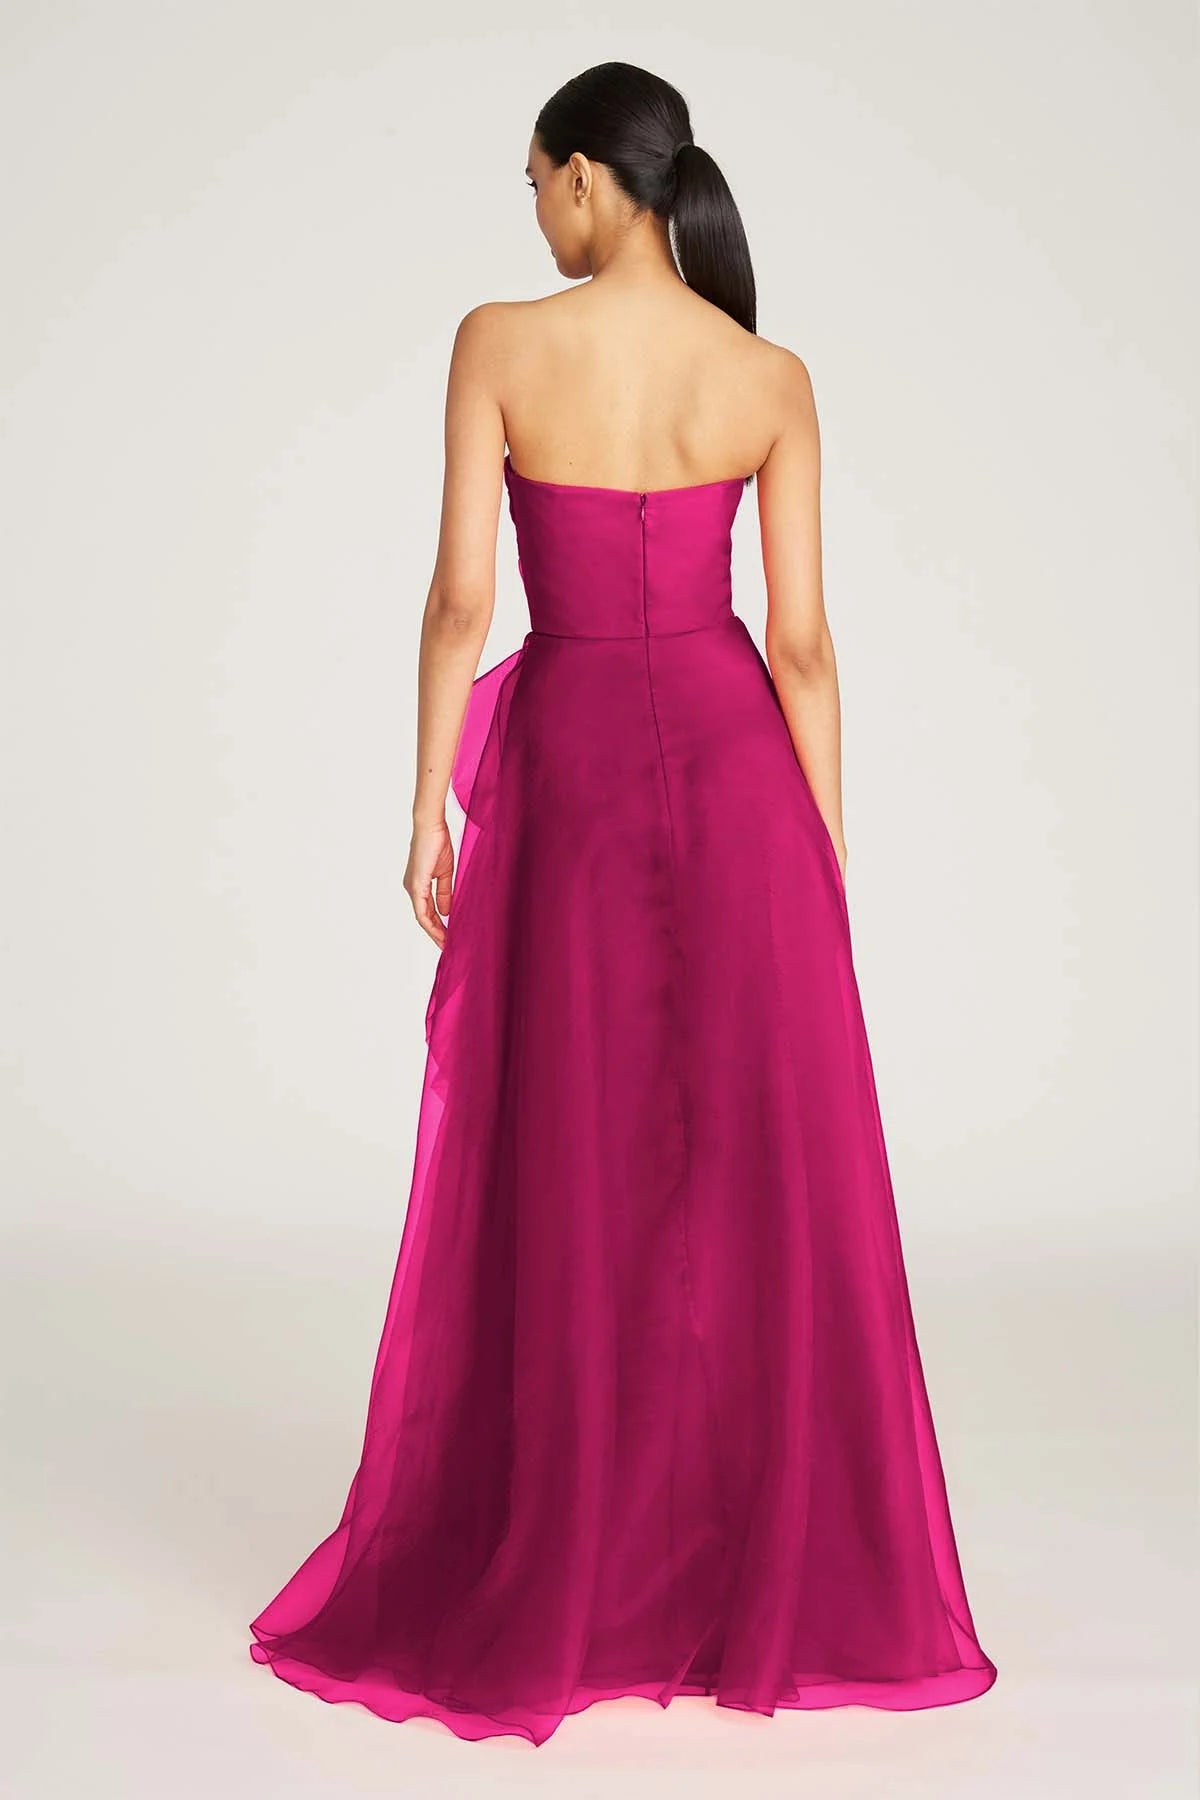 Theia 8817572 Dress | Madeline's Boutique Toronto & Boca Raton | Special Evening Events, Mother of the Bride/Groom